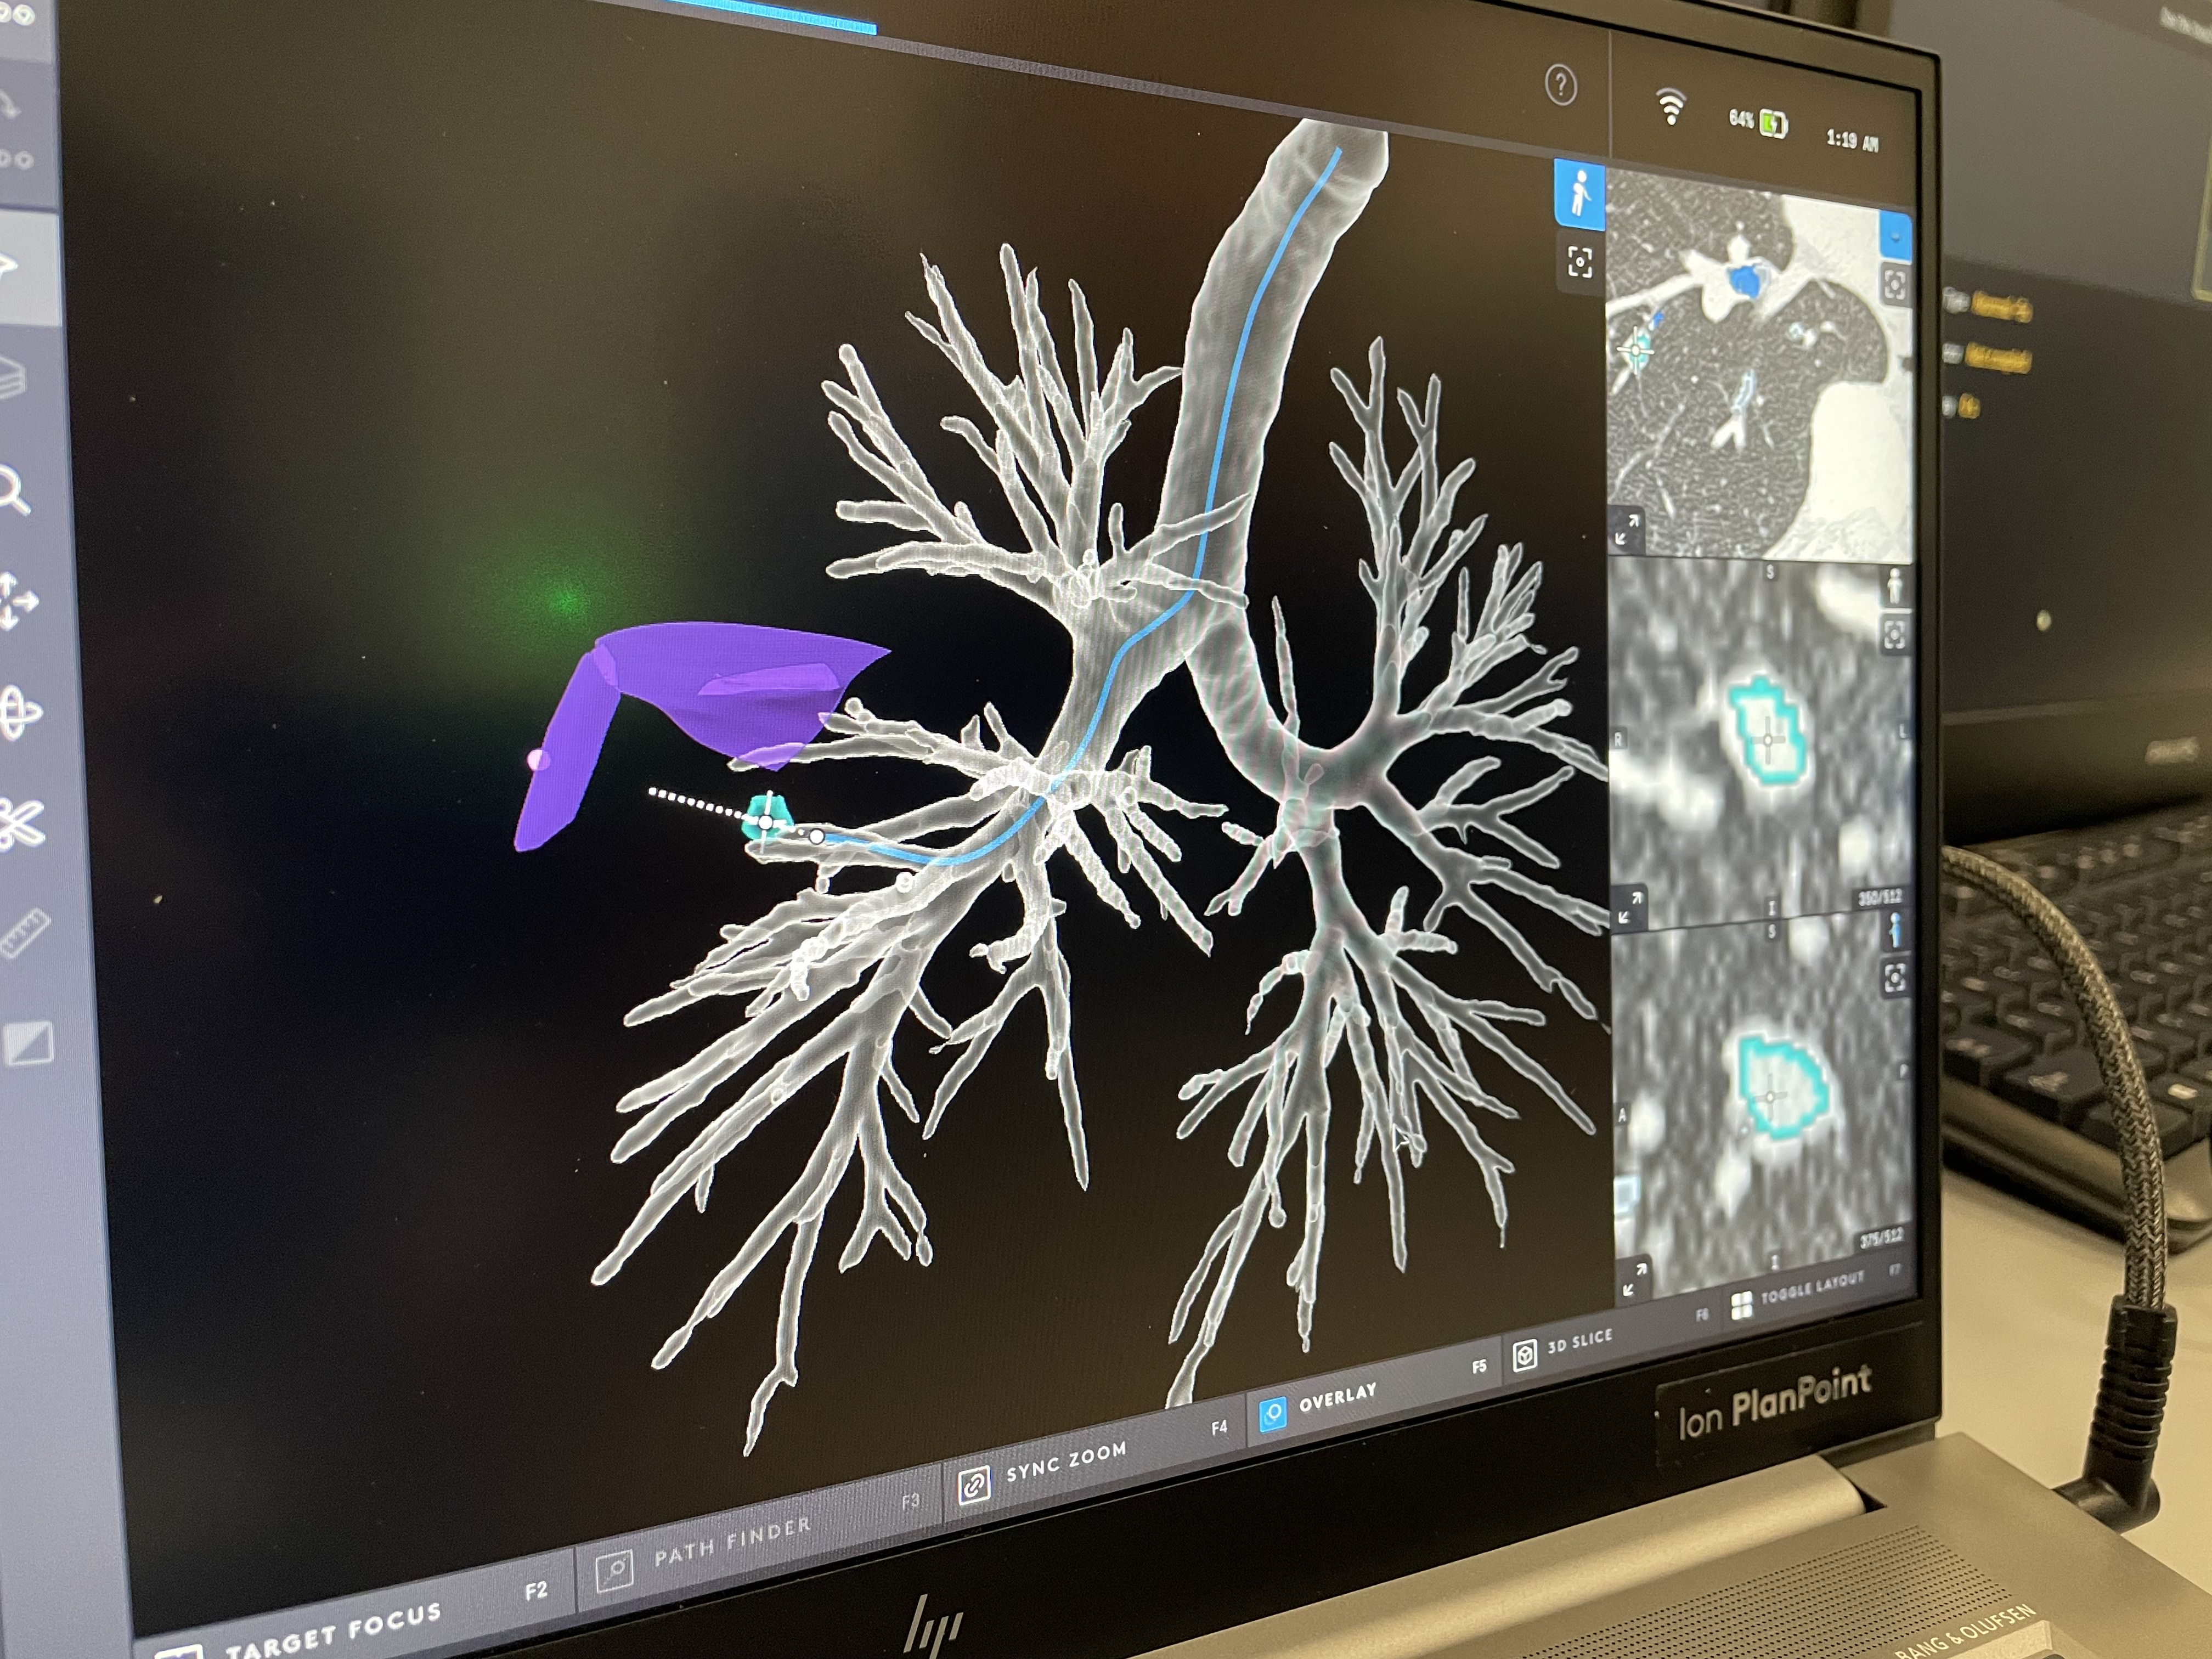 3D image of the lungs generated from CT scans. The suspected cancerous nodule is identified as the blue circle. The software generates a route for the catheter to be guided through the lungs.